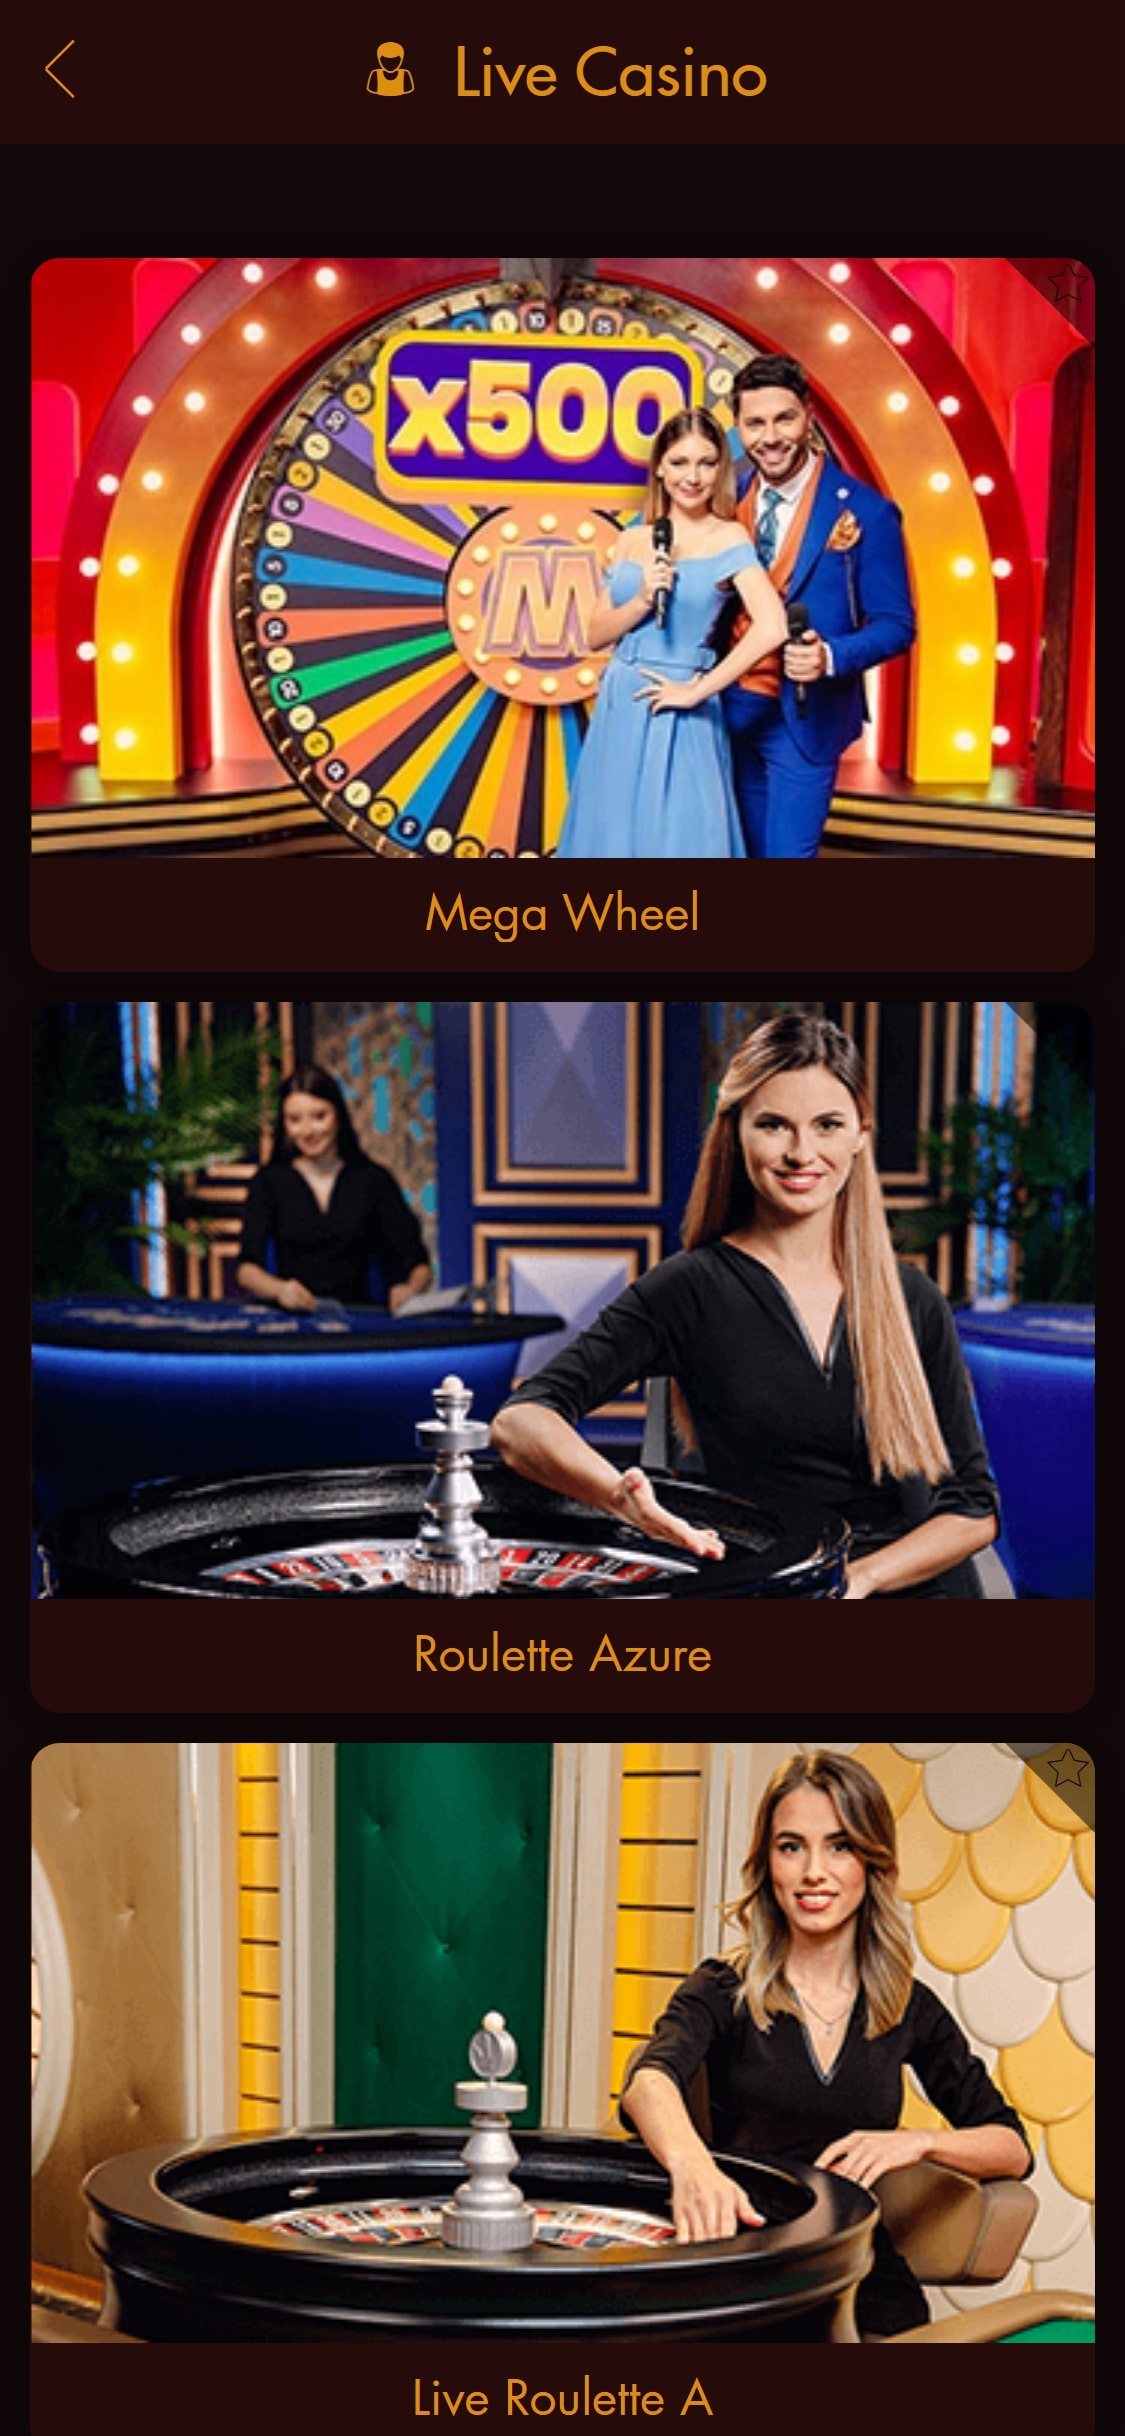 Thebes Casino Mobile Live Dealer Games Review